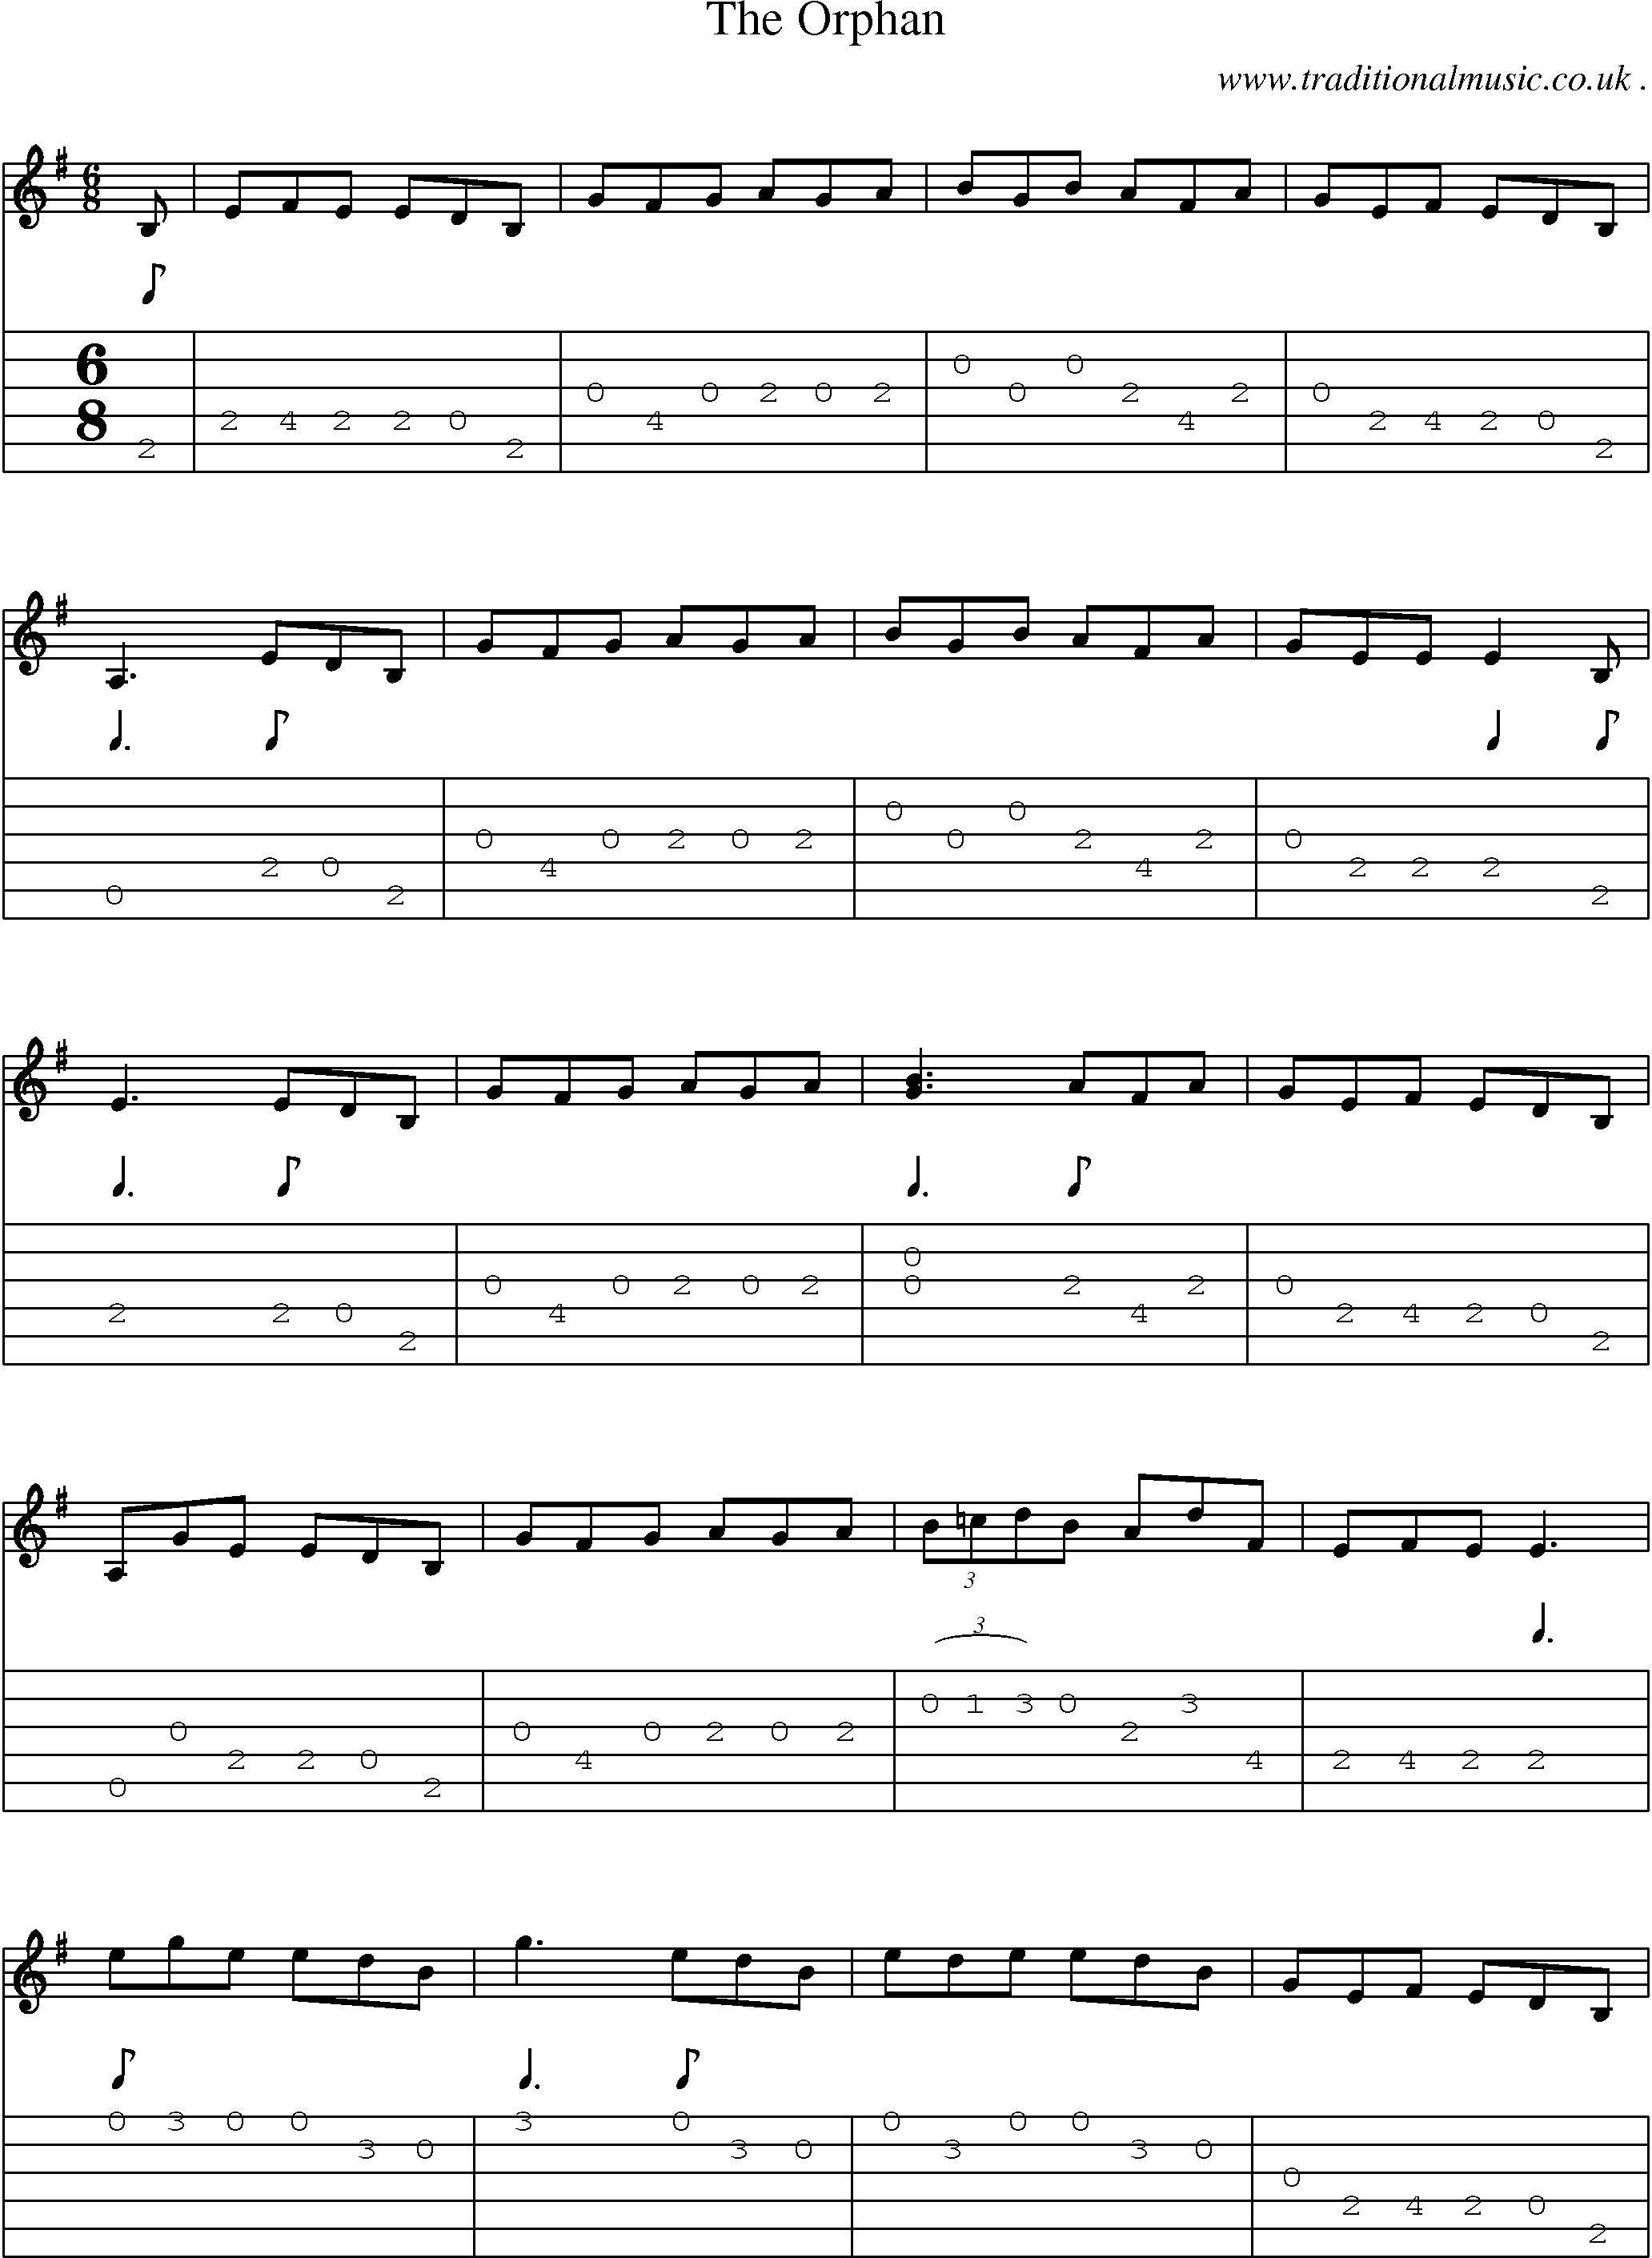 Sheet-Music and Guitar Tabs for The Orphan